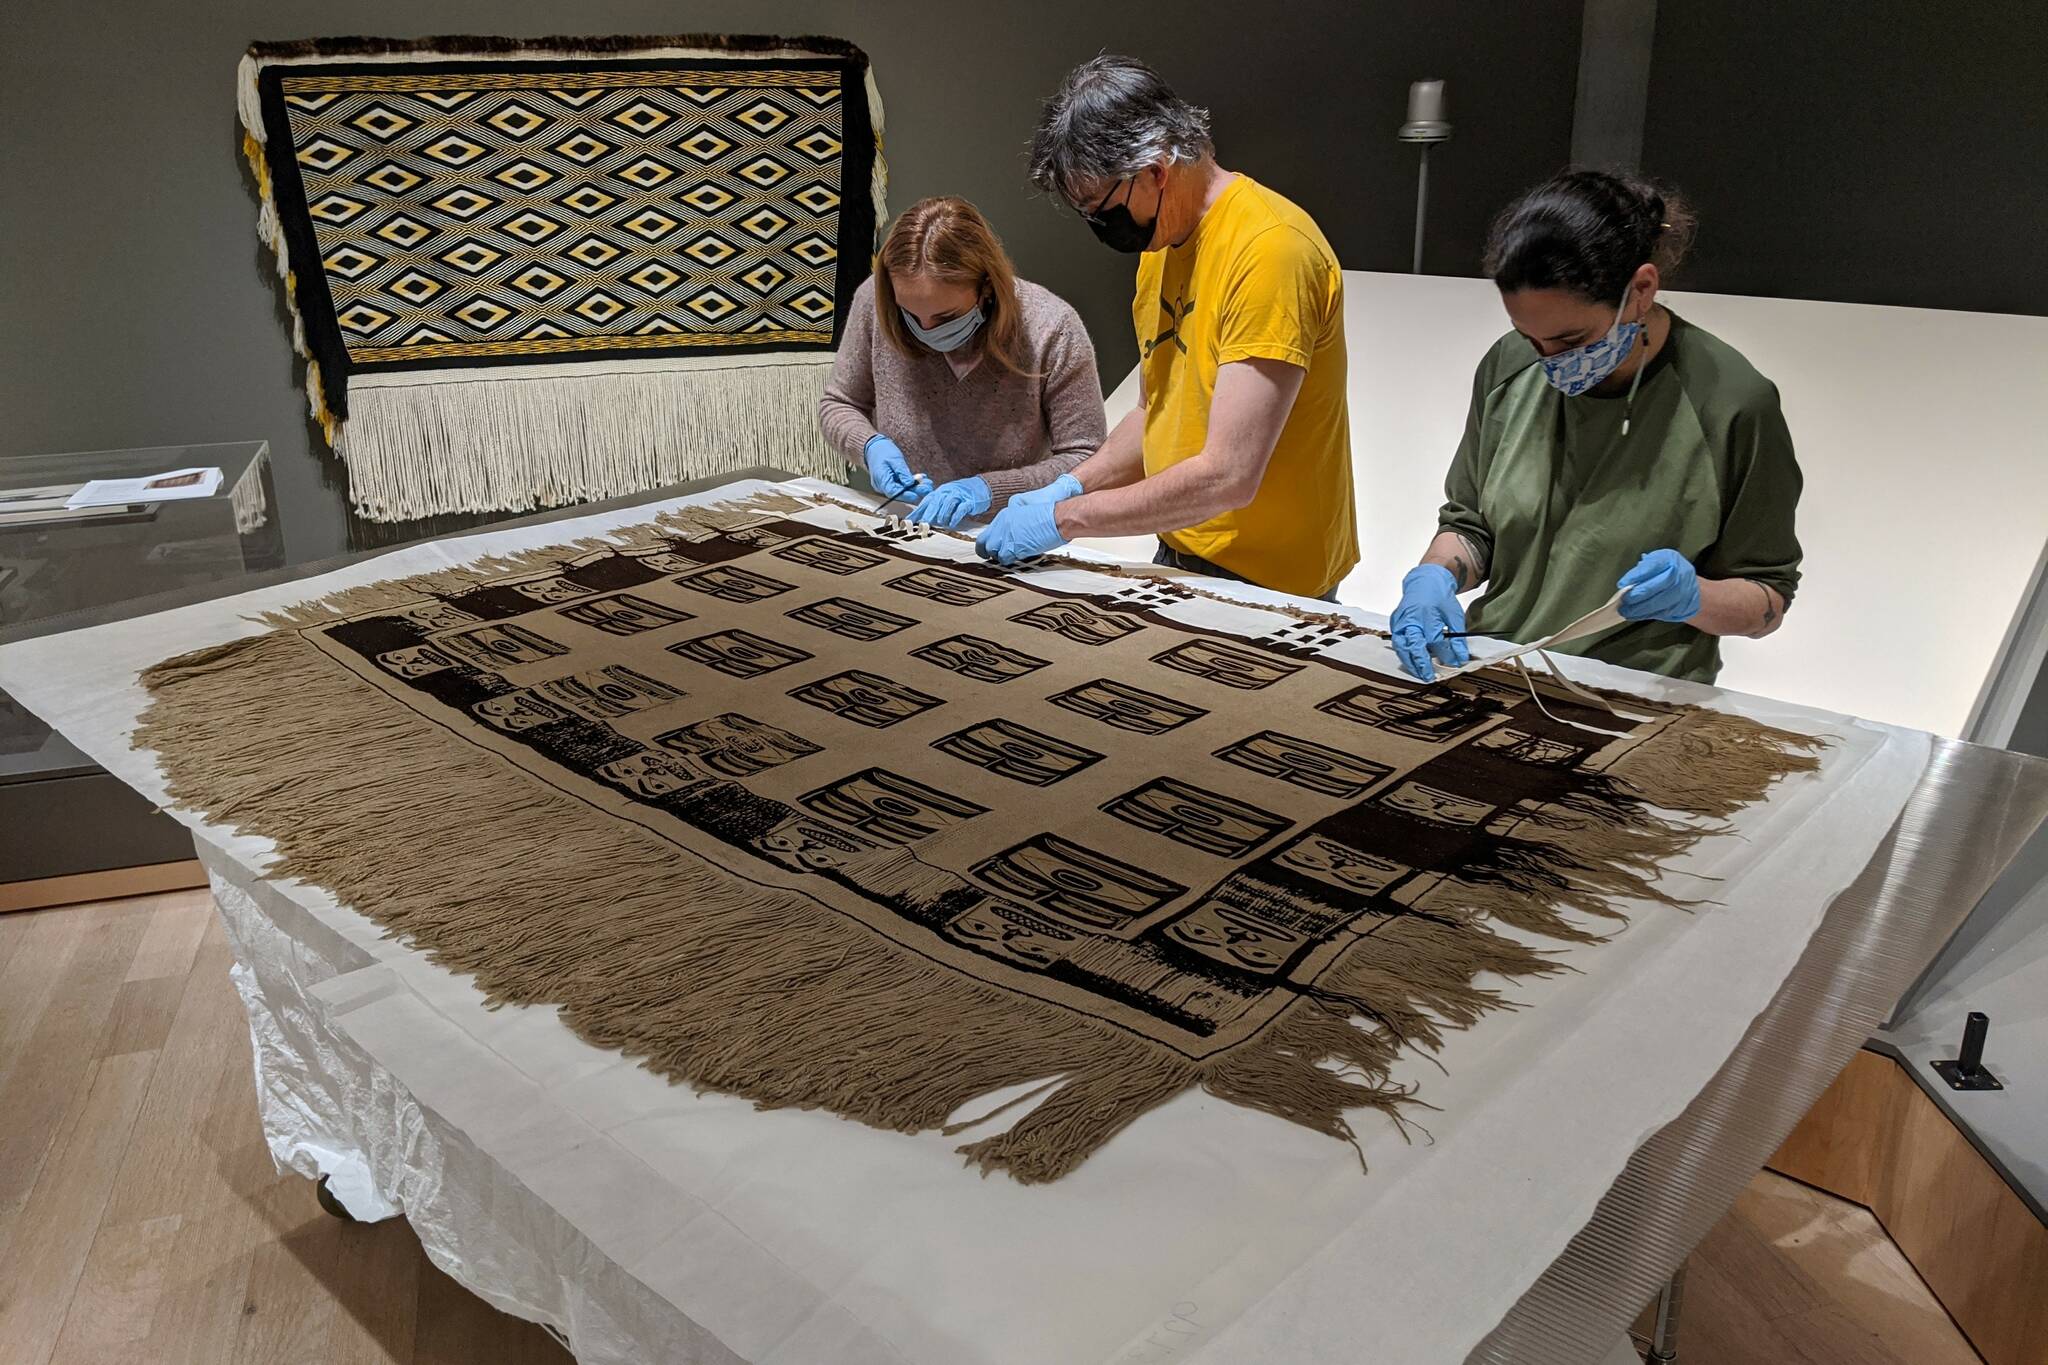 From left to right: Jackie Manning, curator of exhibits for the Alaska State Library, Archives and Museum; Aaron Elmore, exhibit designer, and Ellen Carrlee, conservator for the museum unpack an ancient raven's tail robe on loan from the Royal Ontario Museum in Canada. This robe is one of only about a dozen older robes in existence, according to SLAM collections curator Steven Kenrikson, and will only be on display at SLAM until next month. (Courtesy Photo/ Chelsea Kilgore, Alaska State Library Archives and Museum)